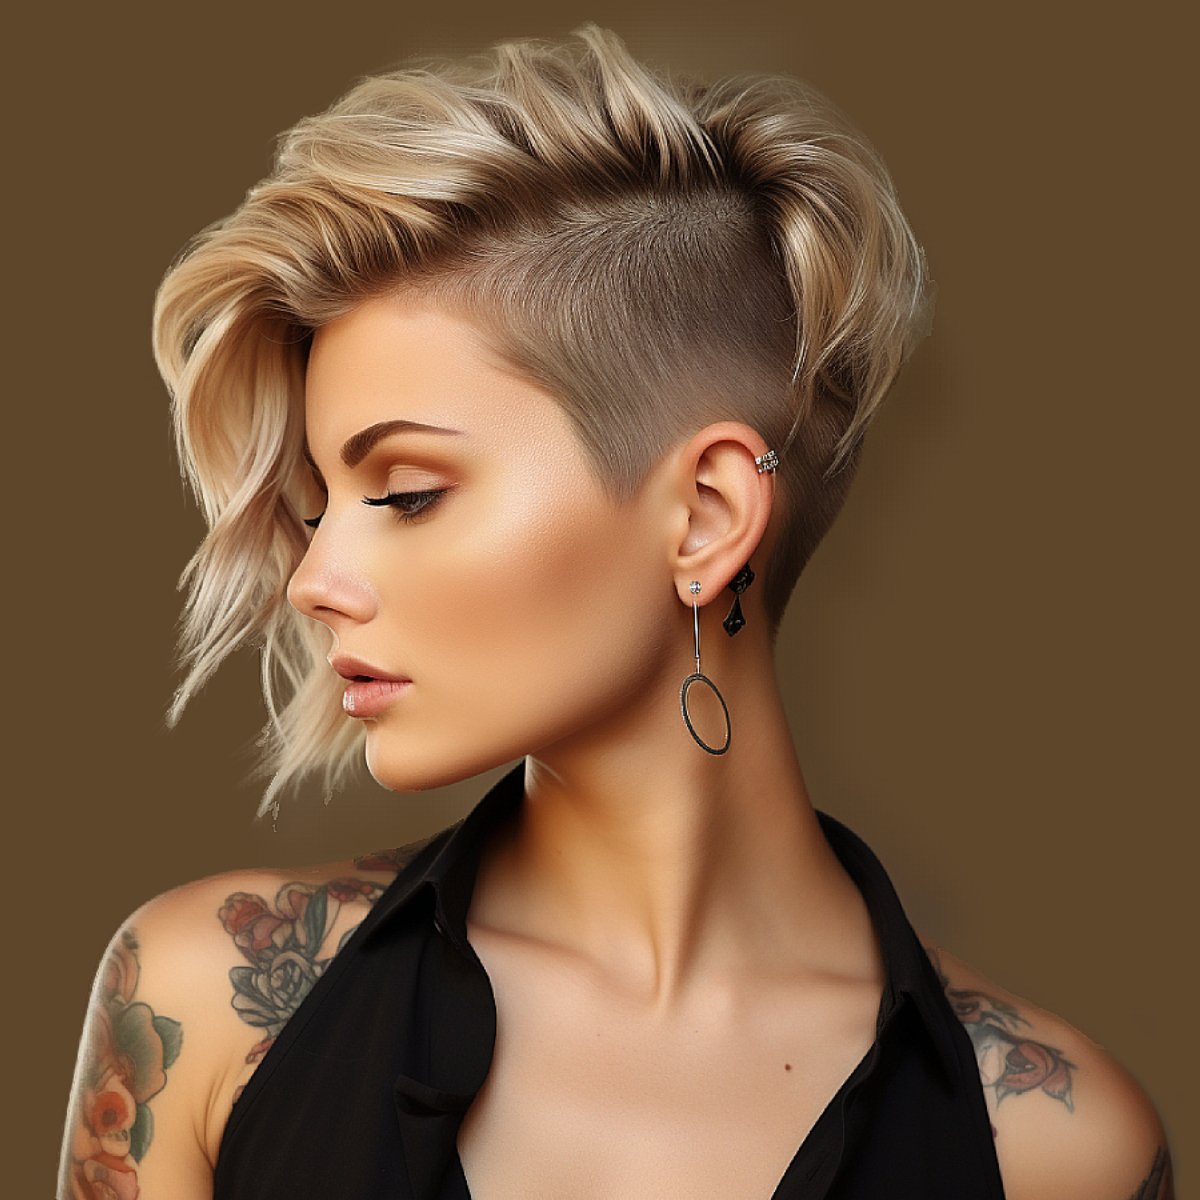 ladies modern hairstyles, which hairstyle for round face, hair stylist  nearby, the new haircut, … | Coiffures à réaliser soi-même, Coiffure mi  long, Bandana cheveux